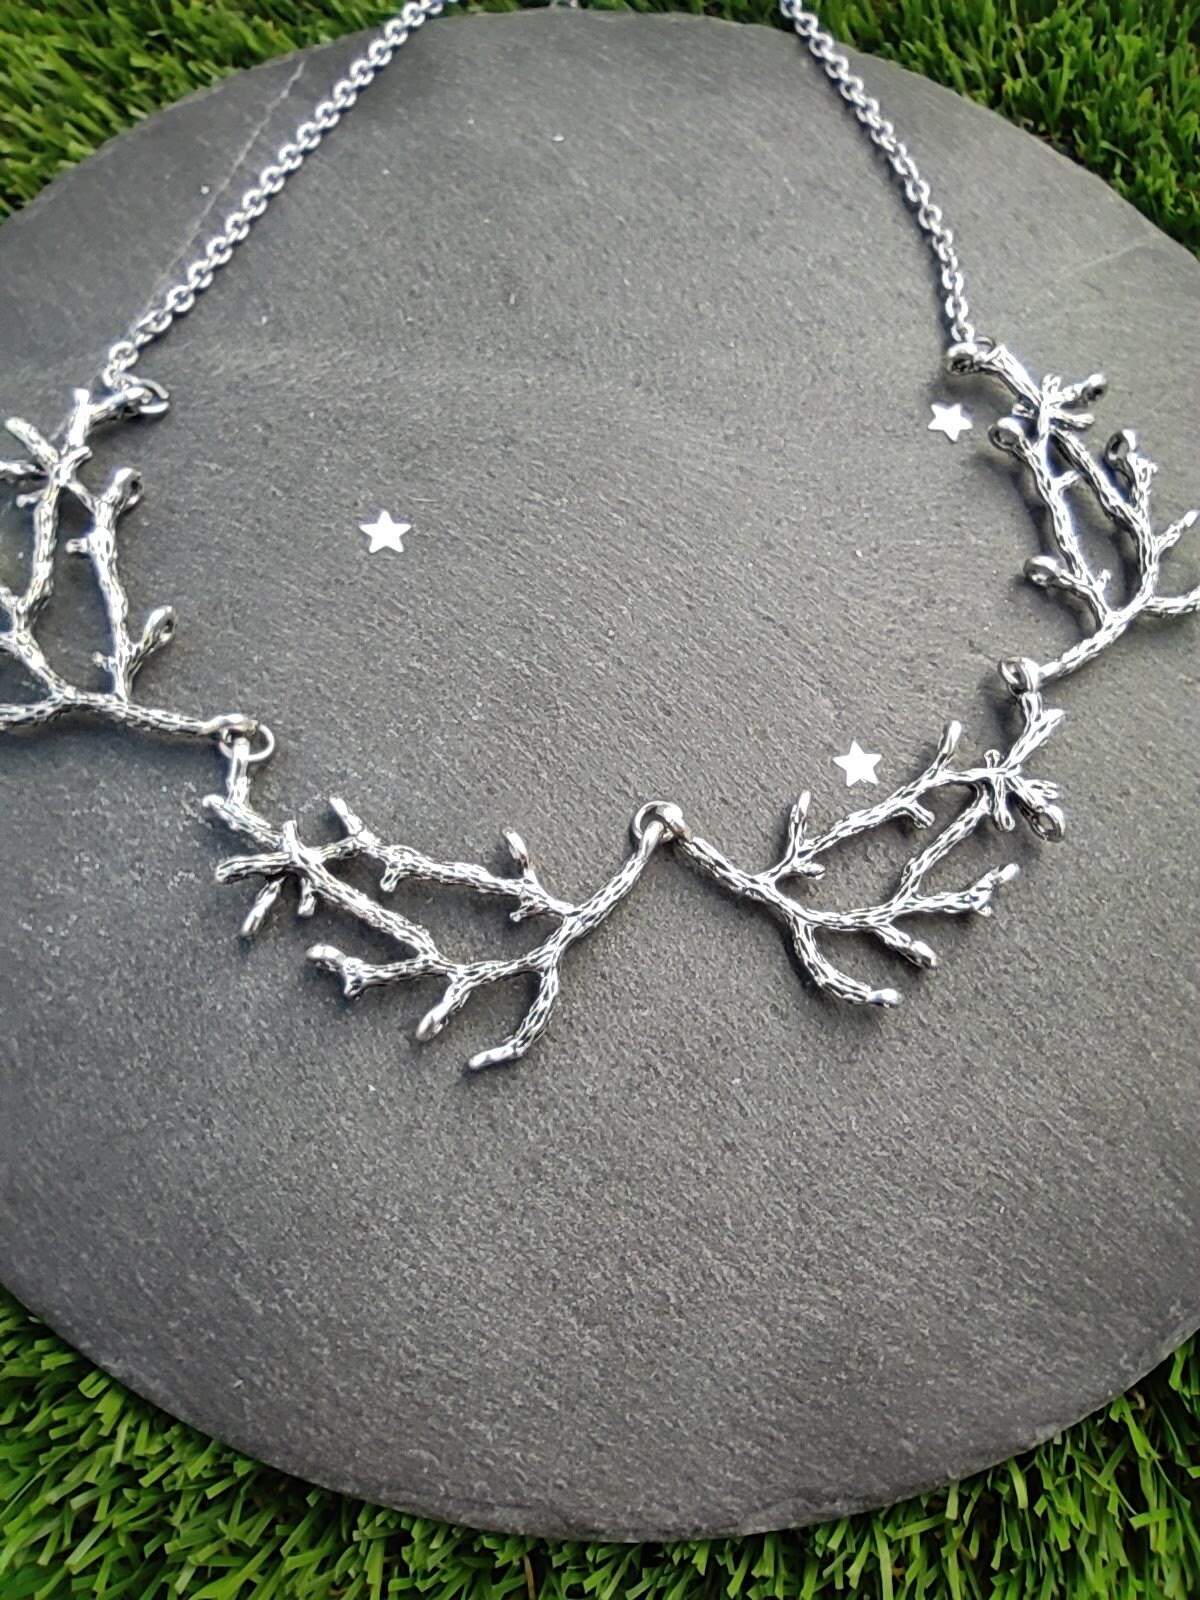 statement branch necklace silver twig necklace Into the woods necklace Sieraden Kettingen Statementkettingen woodland necklace antler necklace 